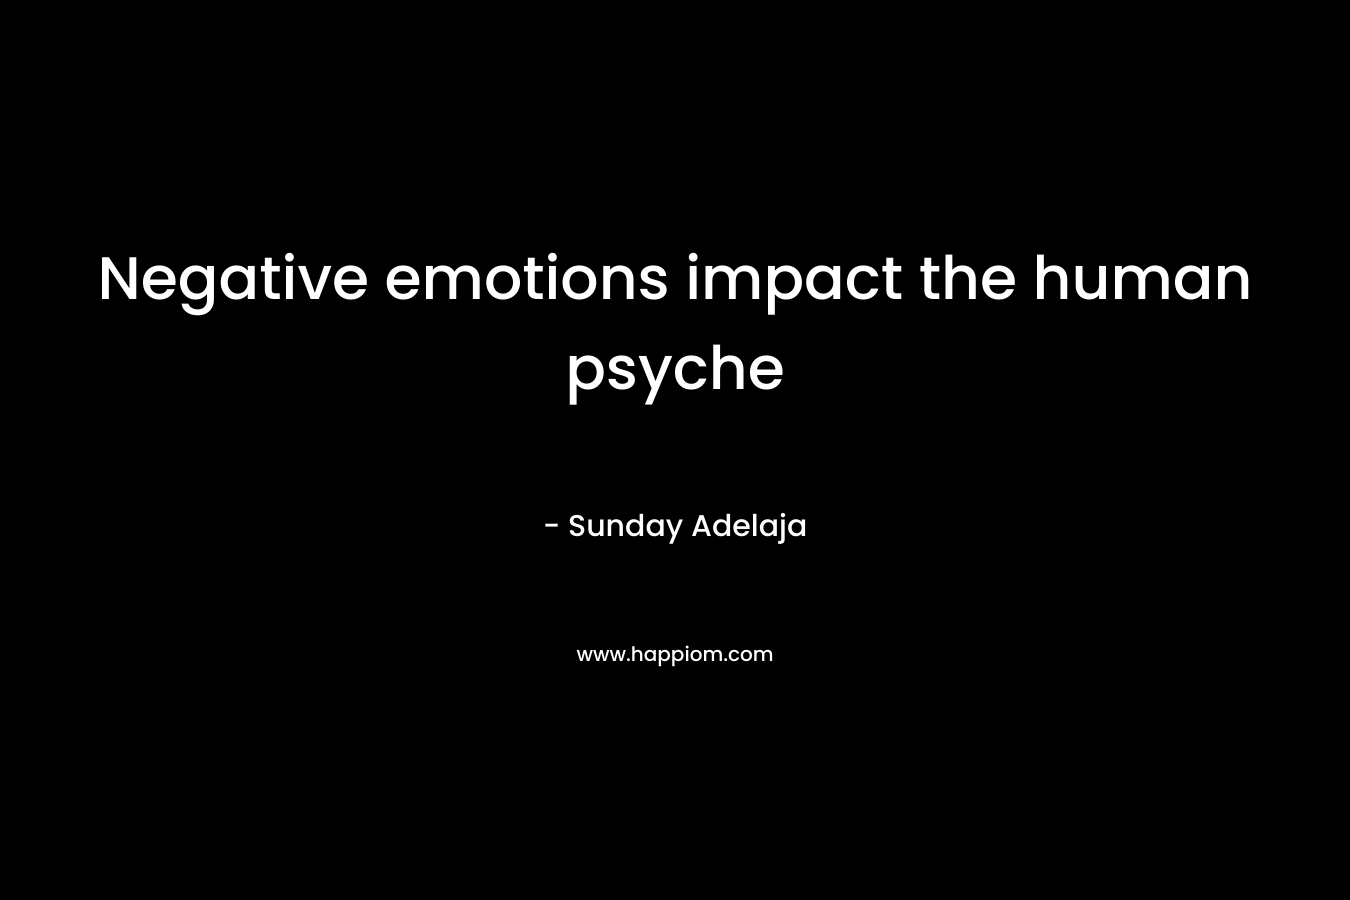 Negative emotions impact the human psyche